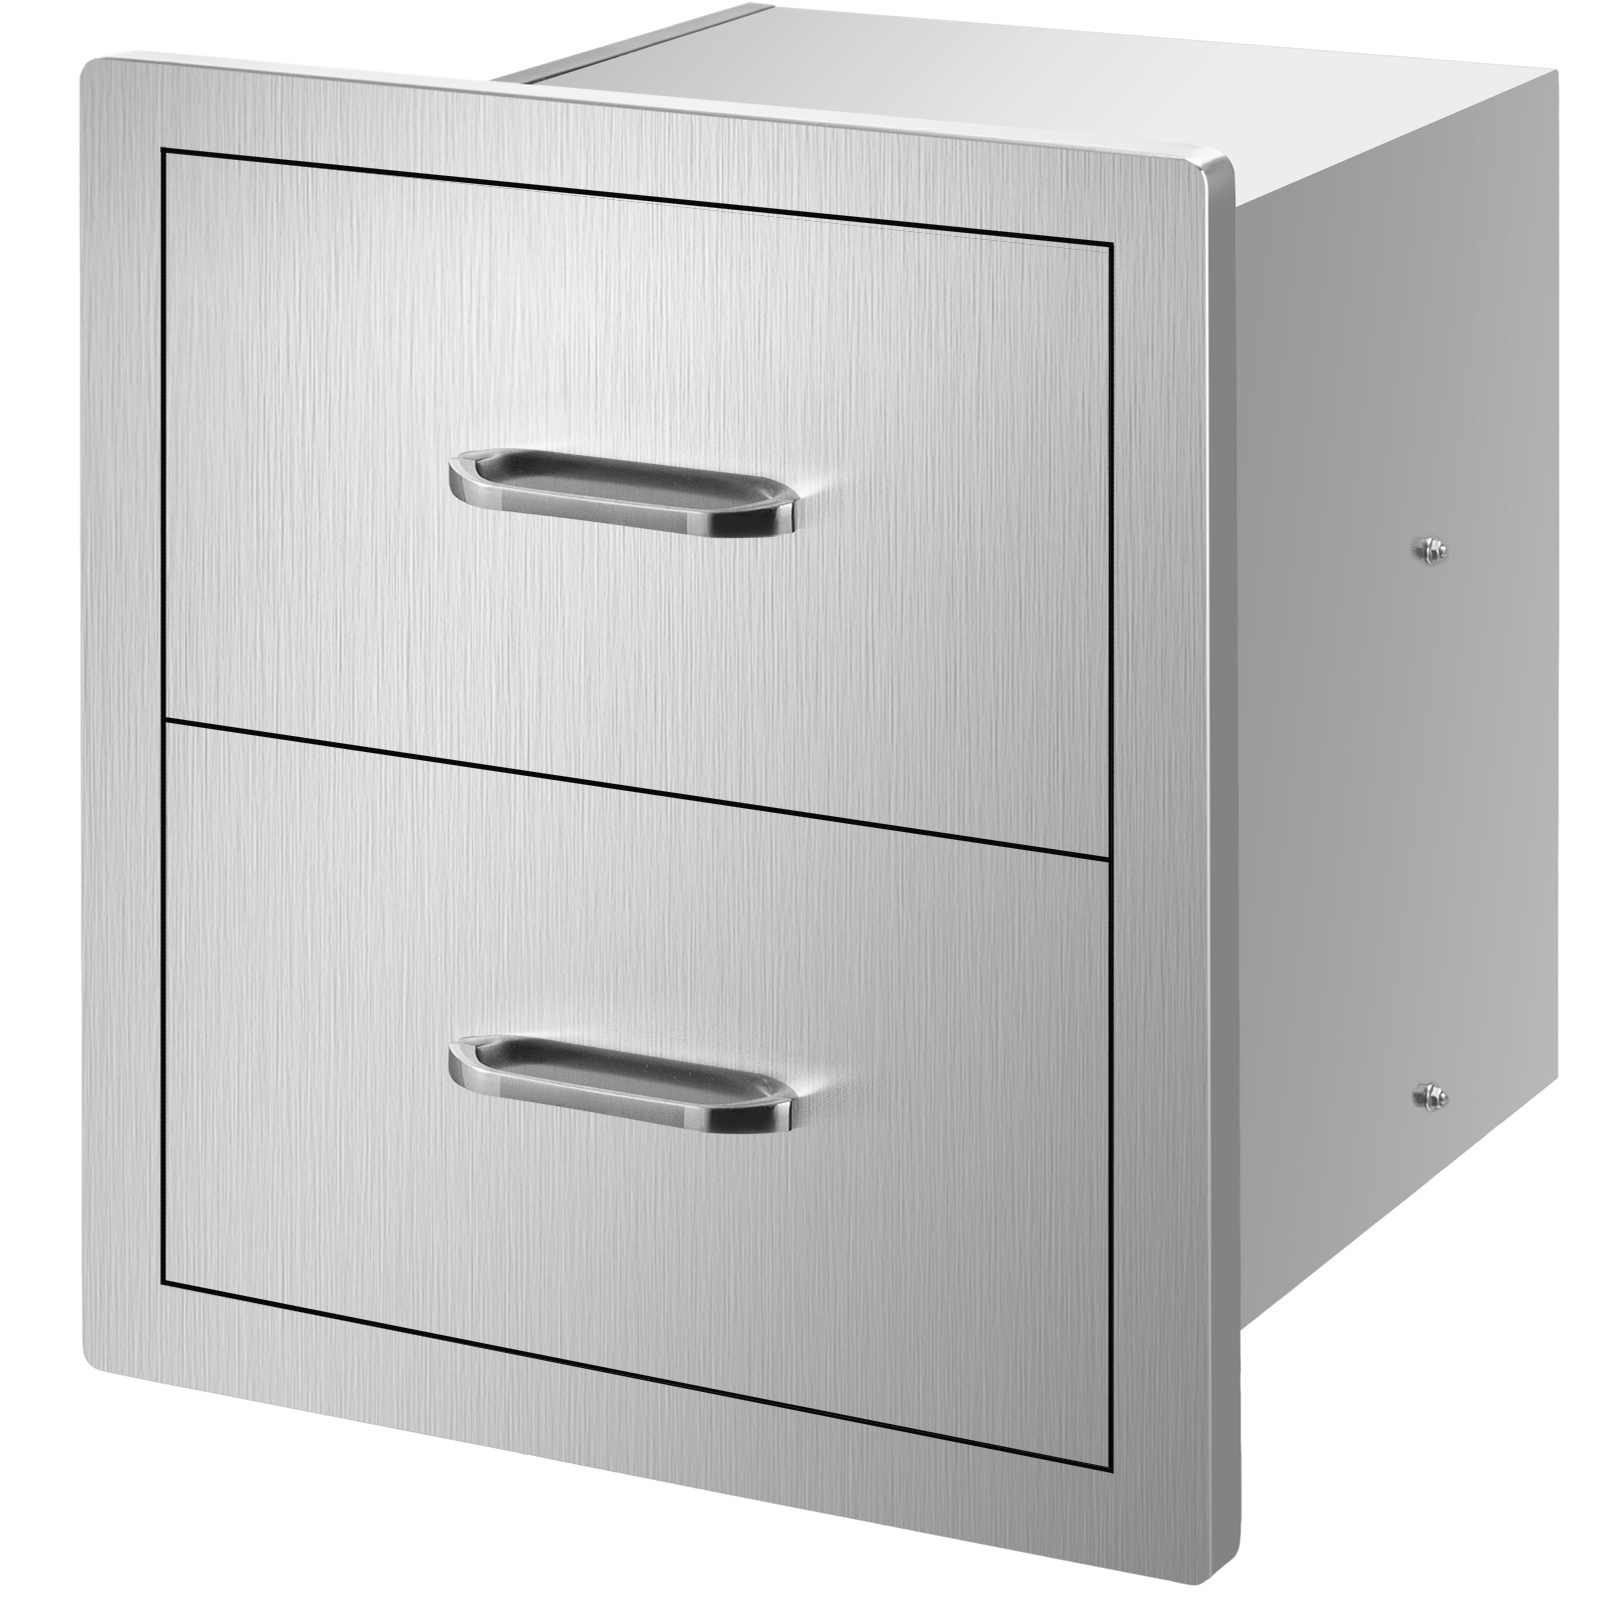 Vevor Stainless Steel Outdoor Kitchen Drawers Outdoor 18.1x21.3 In Double Drawer от Vevor Many GEOs